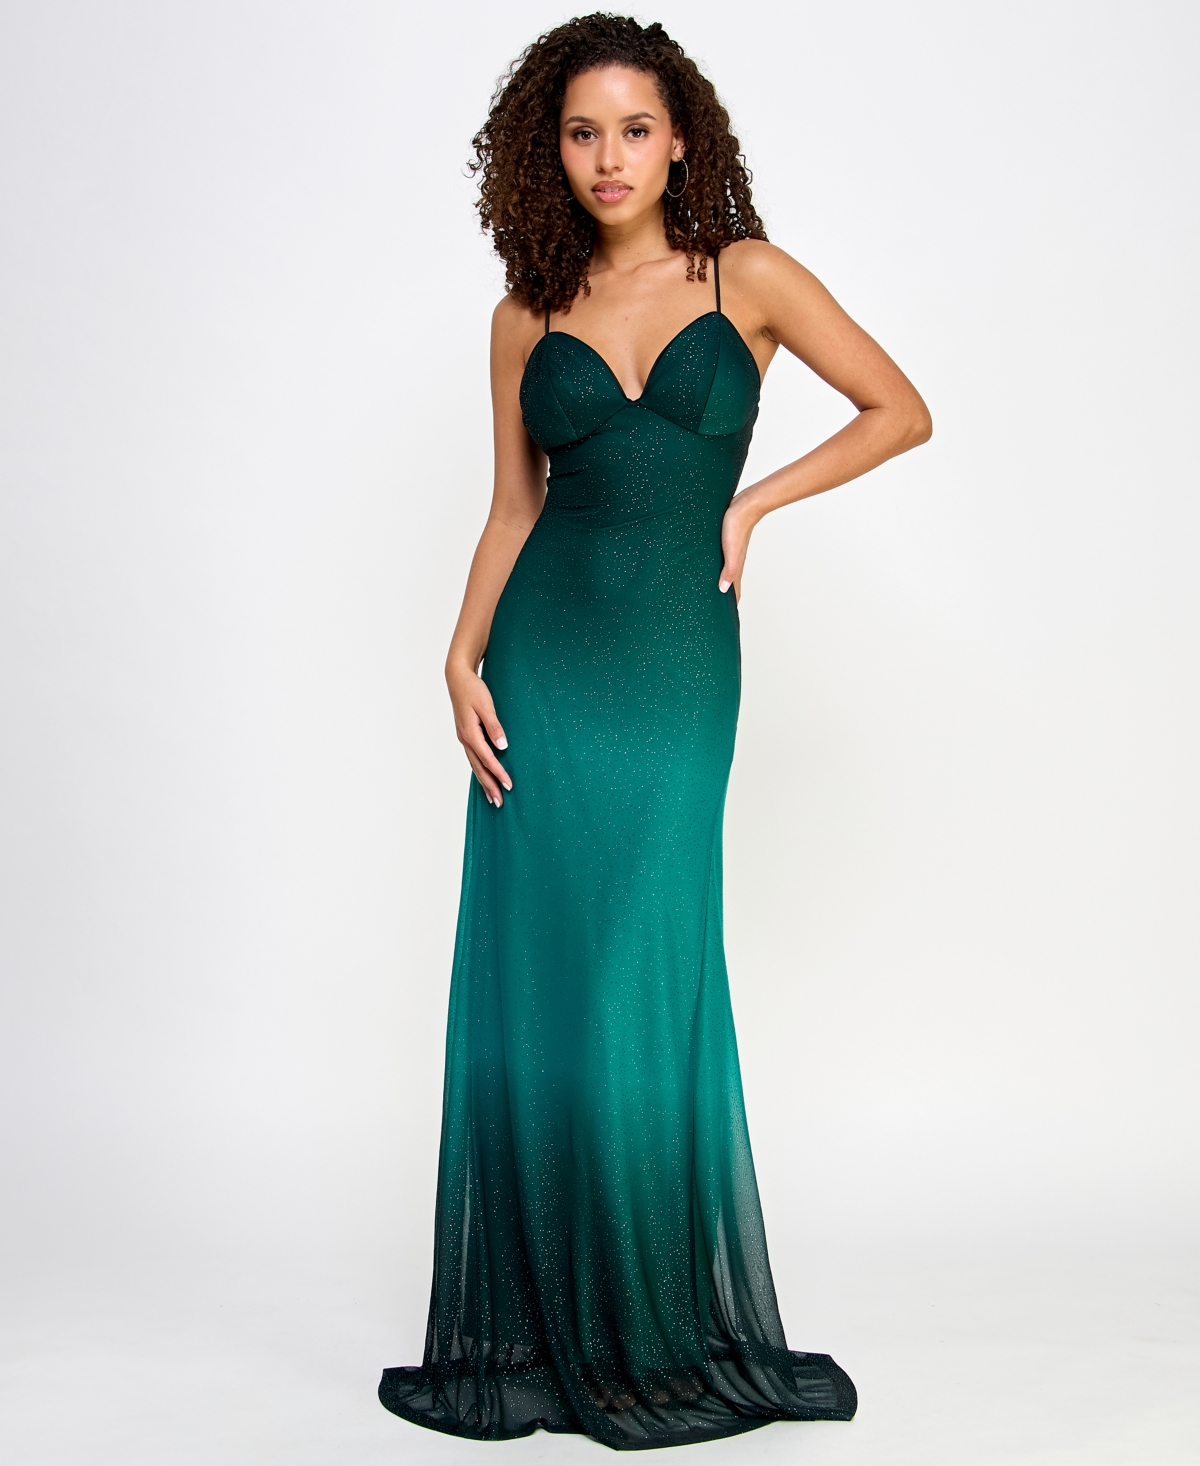 Juniors' Strappy Glitter Slim-Fit Gown - Hunter/ Peacock